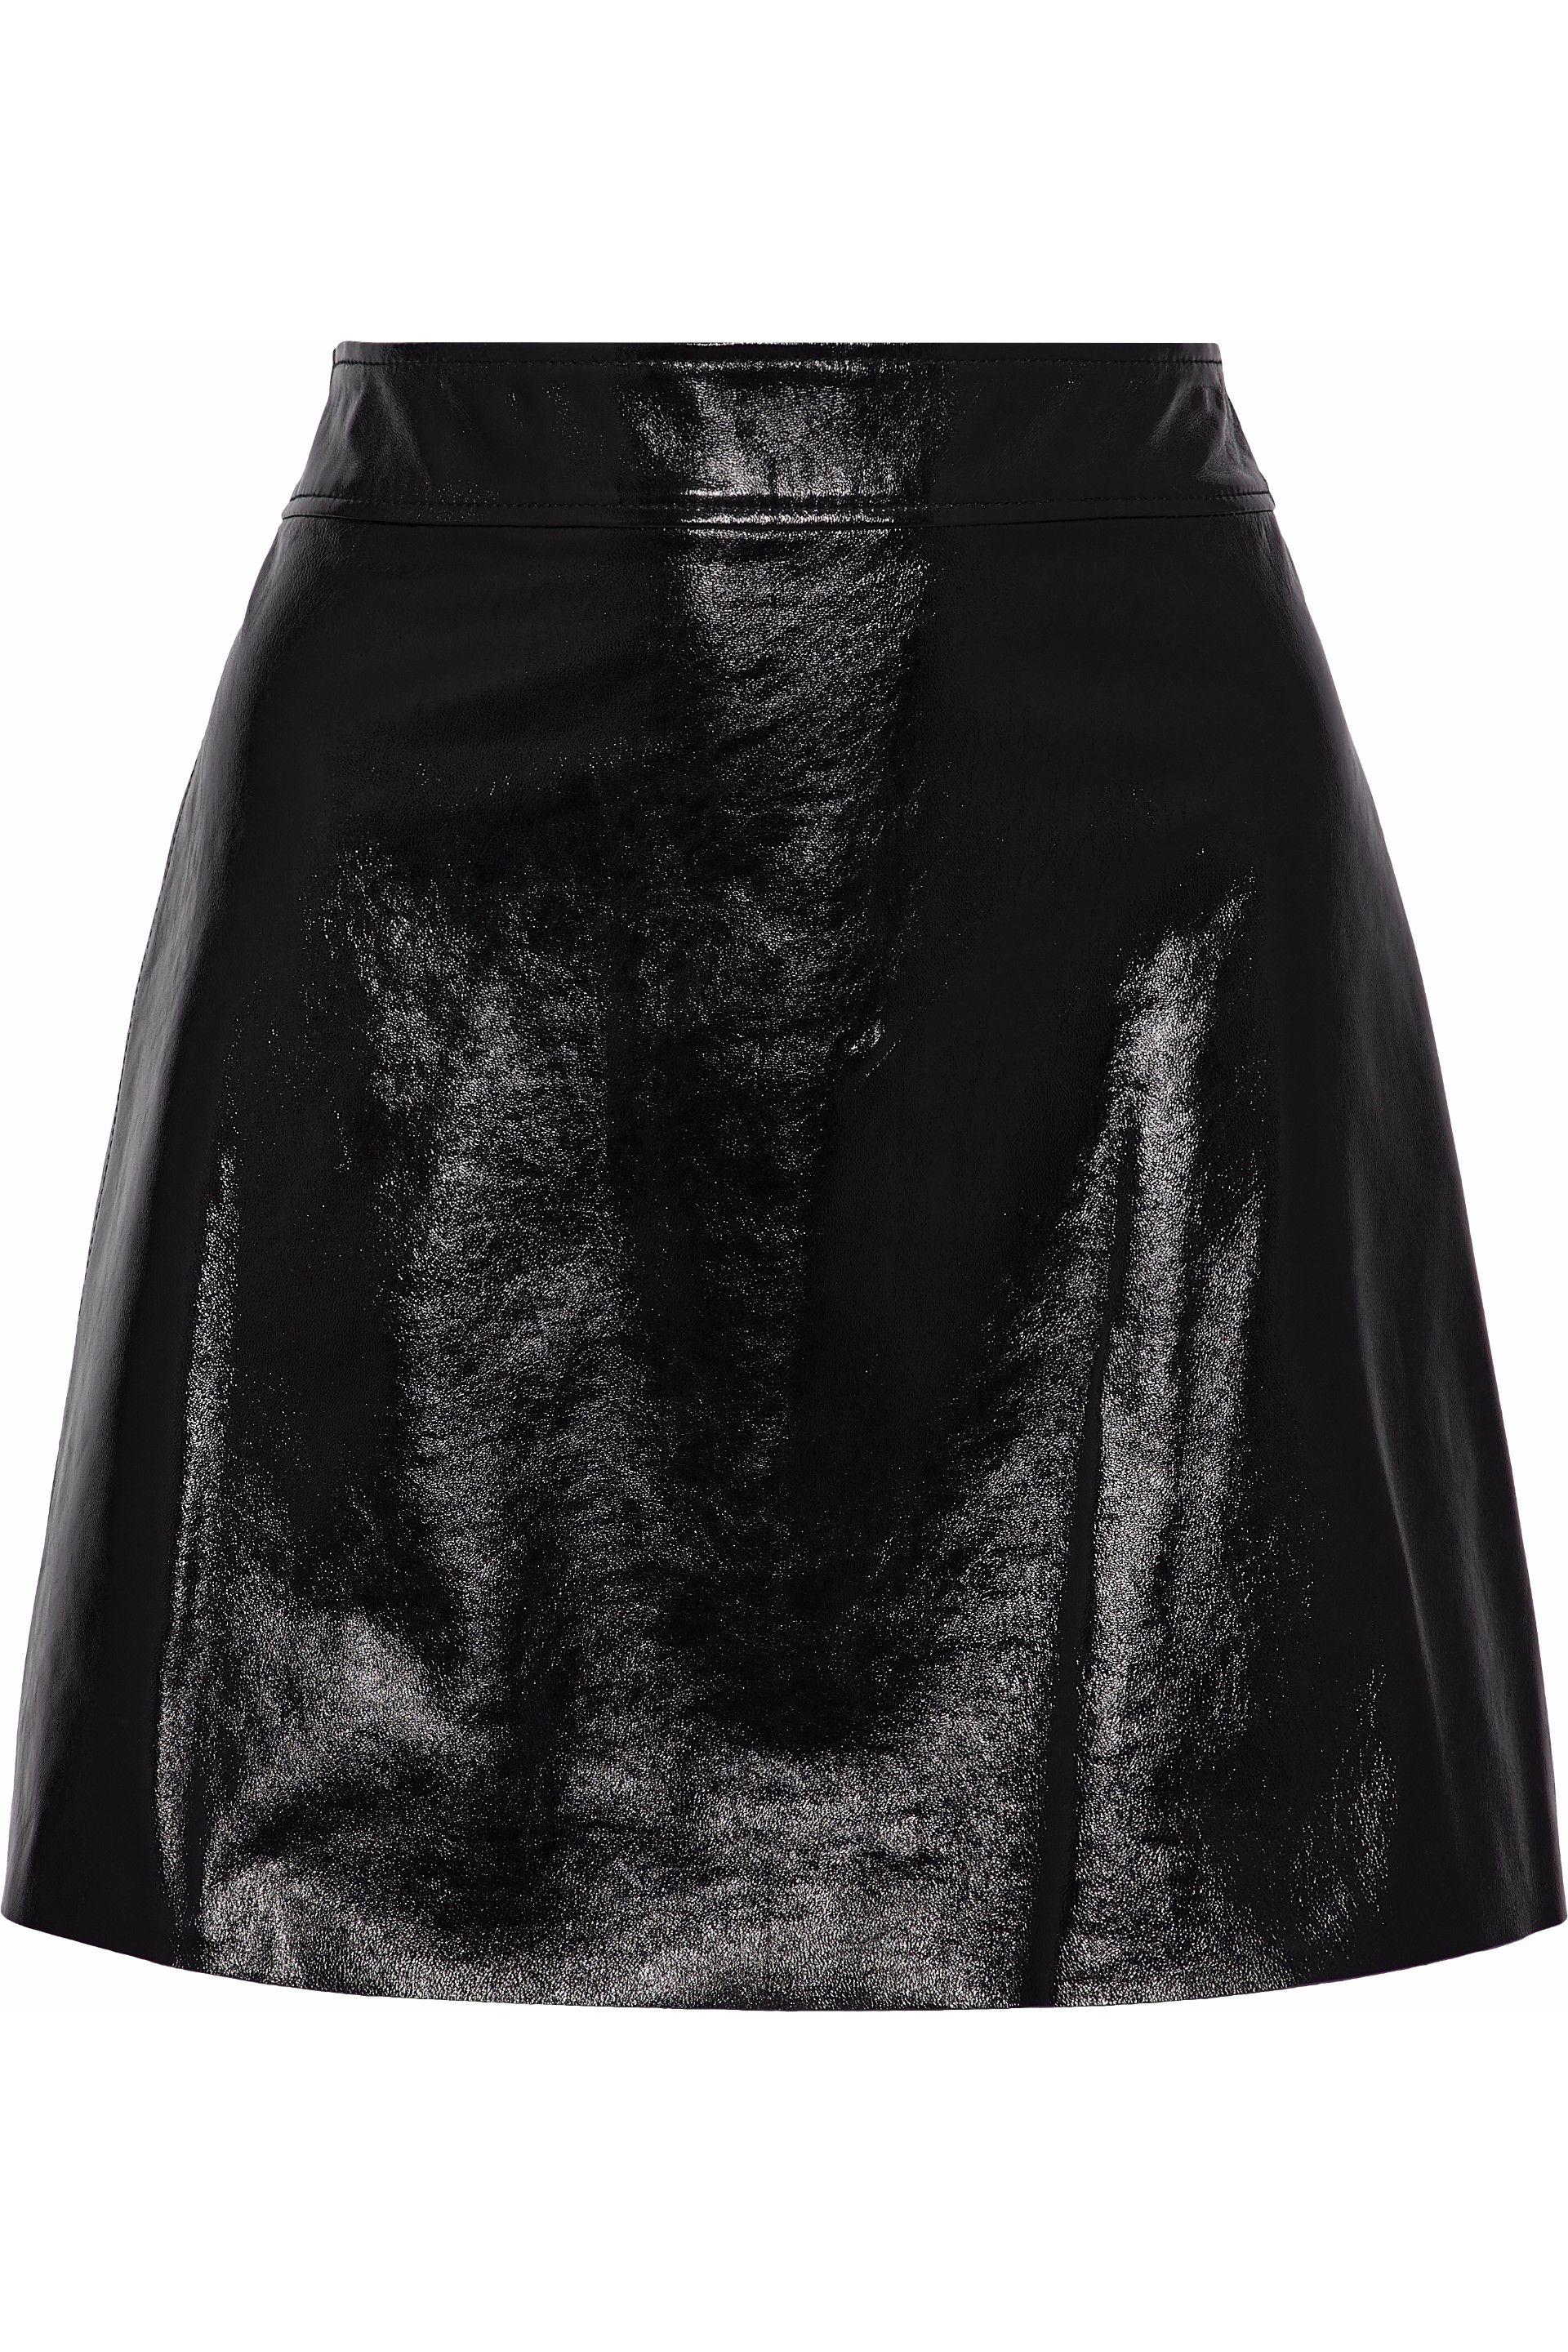 Theory Crinkled Patent-leather Mini Skirt Black - Lyst